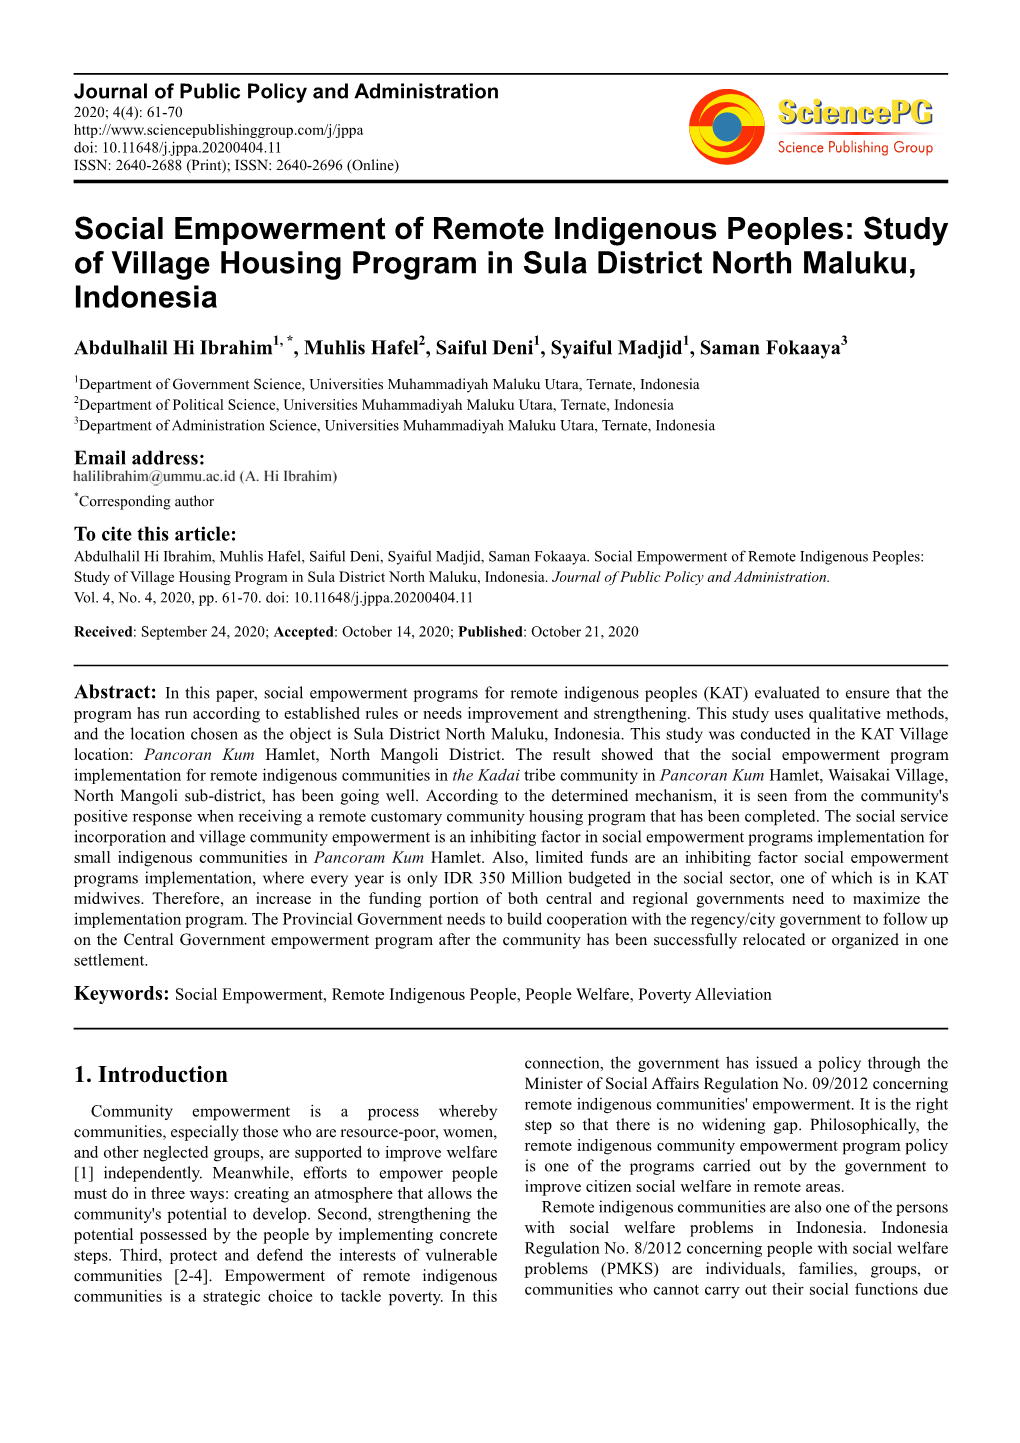 Social Empowerment of Remote Indigenous Peoples: Study of Village Housing Program in Sula District North Maluku, Indonesia